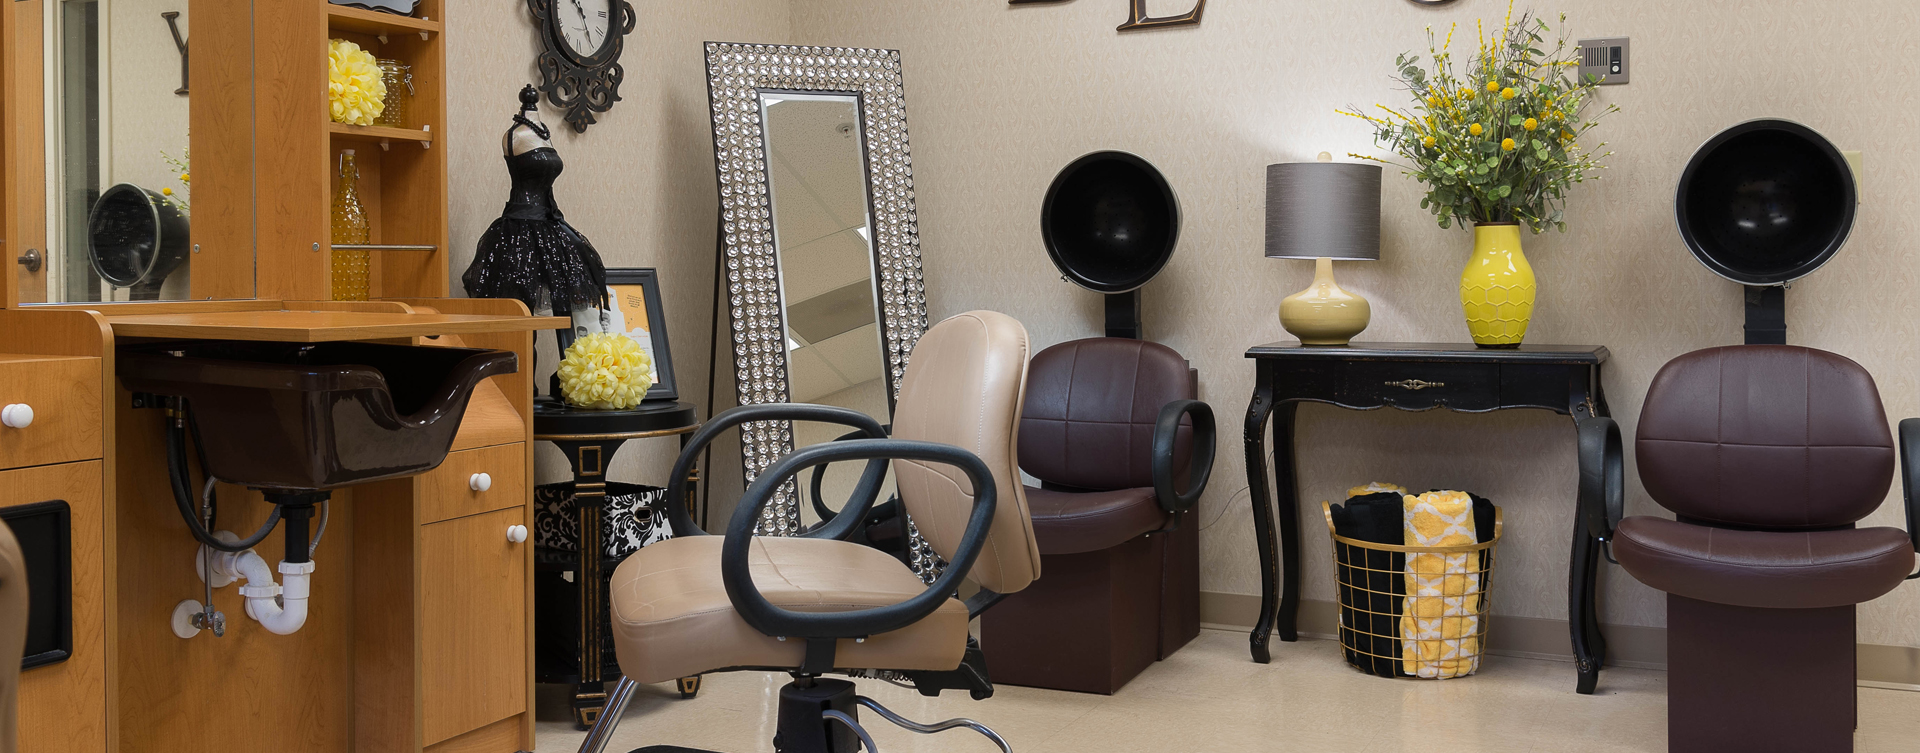 Strut on in and find out what the buzz is all about in the salon at Bickford of Middletown